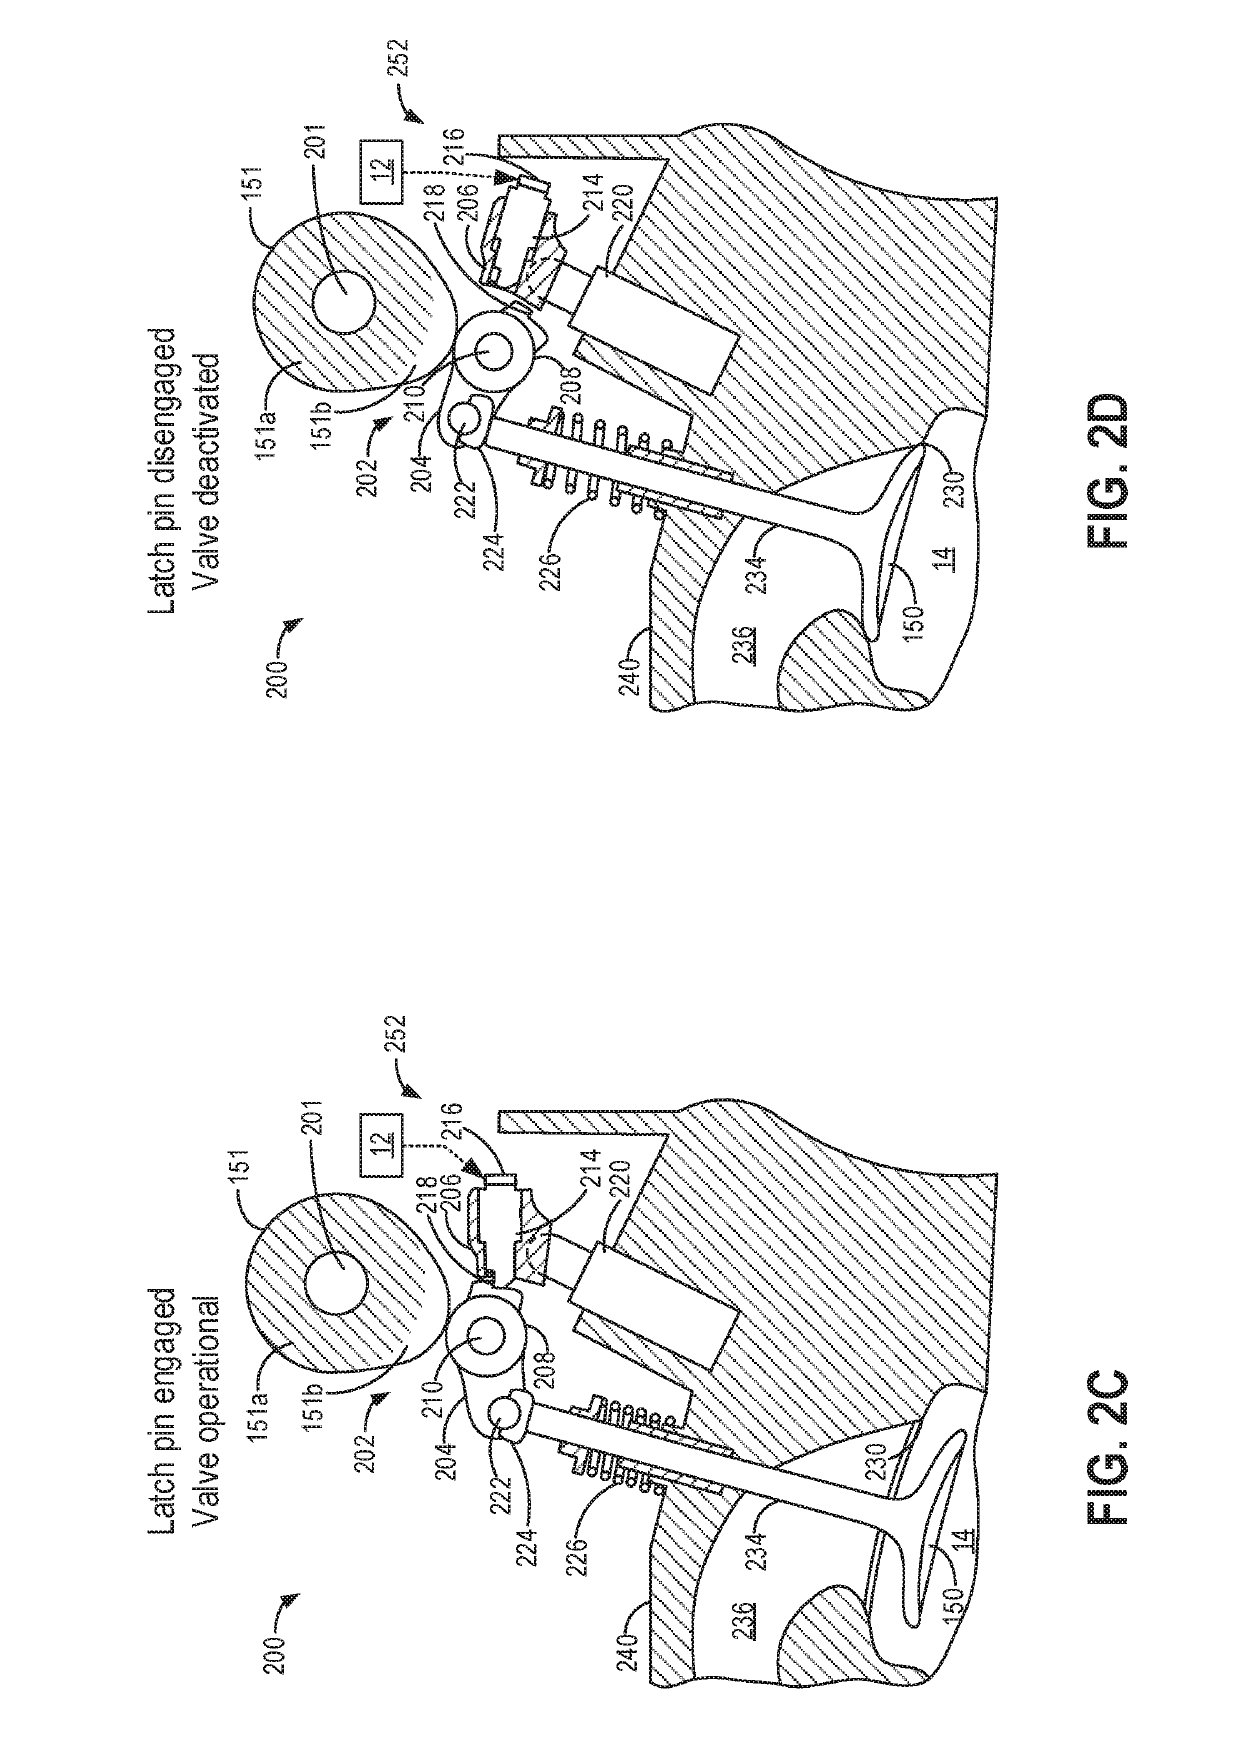 Method and system for variable displacement engine diagnostics